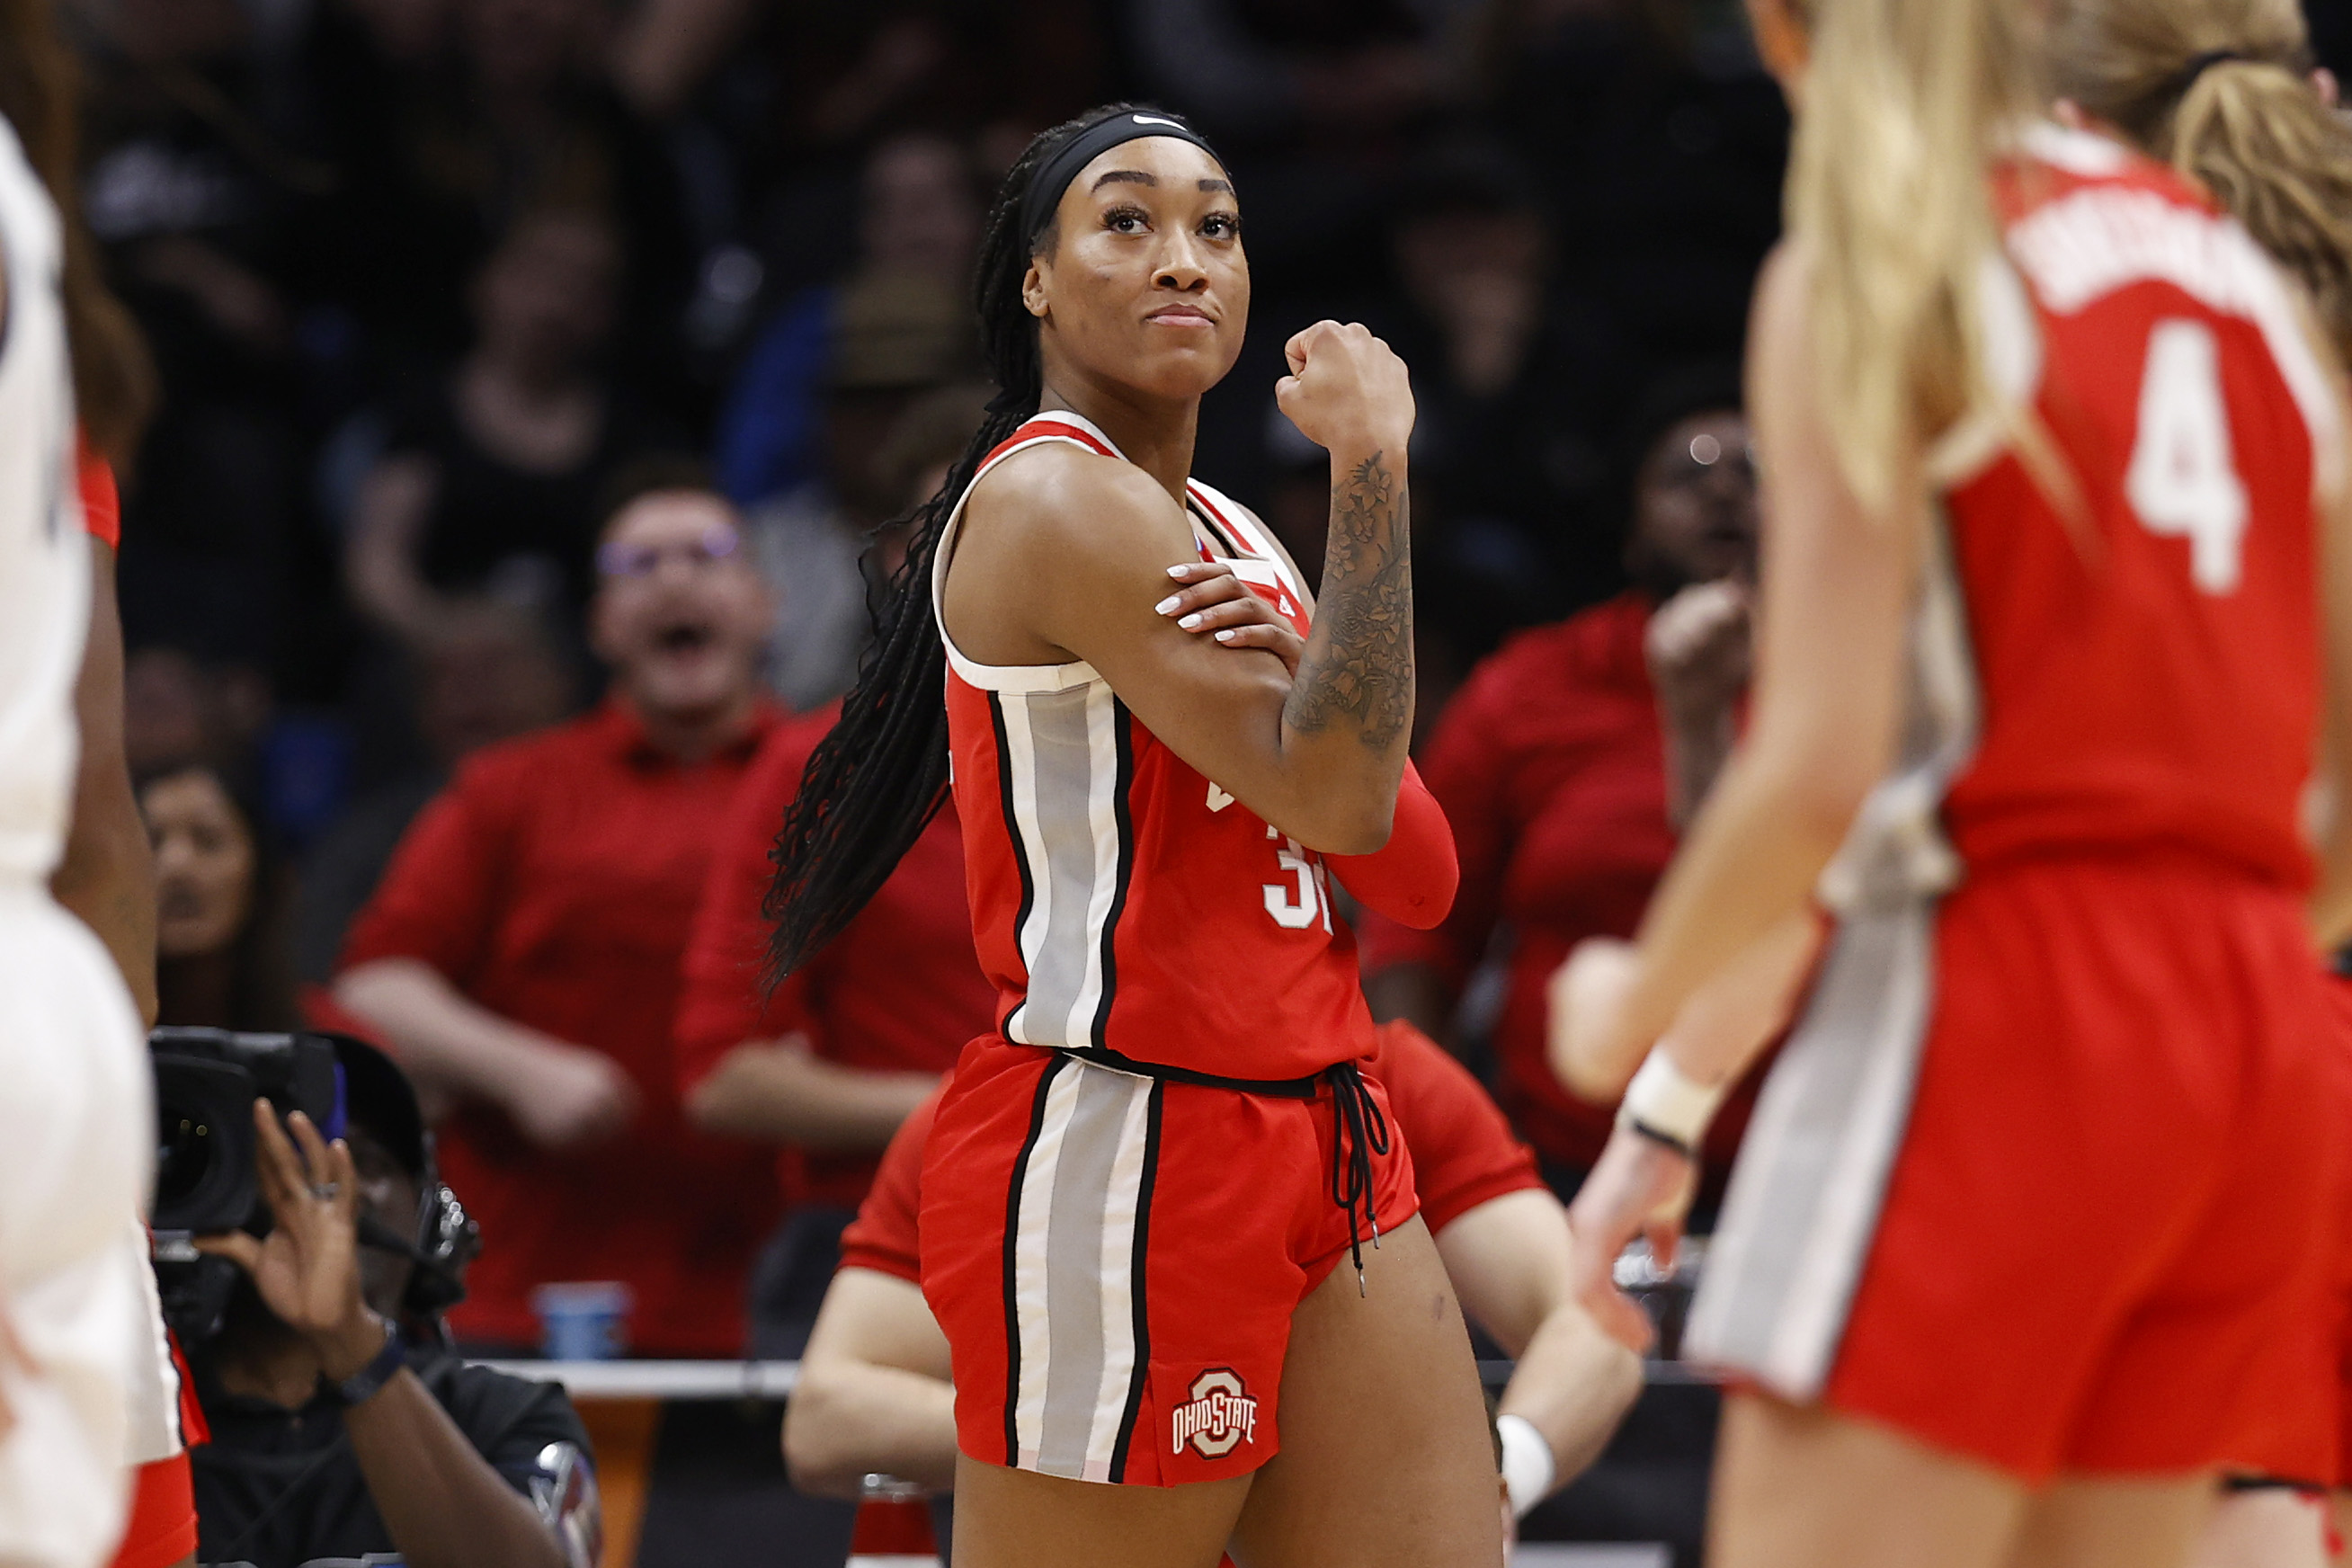 Cotie McMahon #32 of the Ohio State Buckeyes reacts after being fouled and making the basket during the fourth quarter against the UConn Huskies in the Sweet 16 round of the NCAA Women's Basketball Tournament at Climate Pledge Arena on March 25, 2023 in Seattle, Washington.